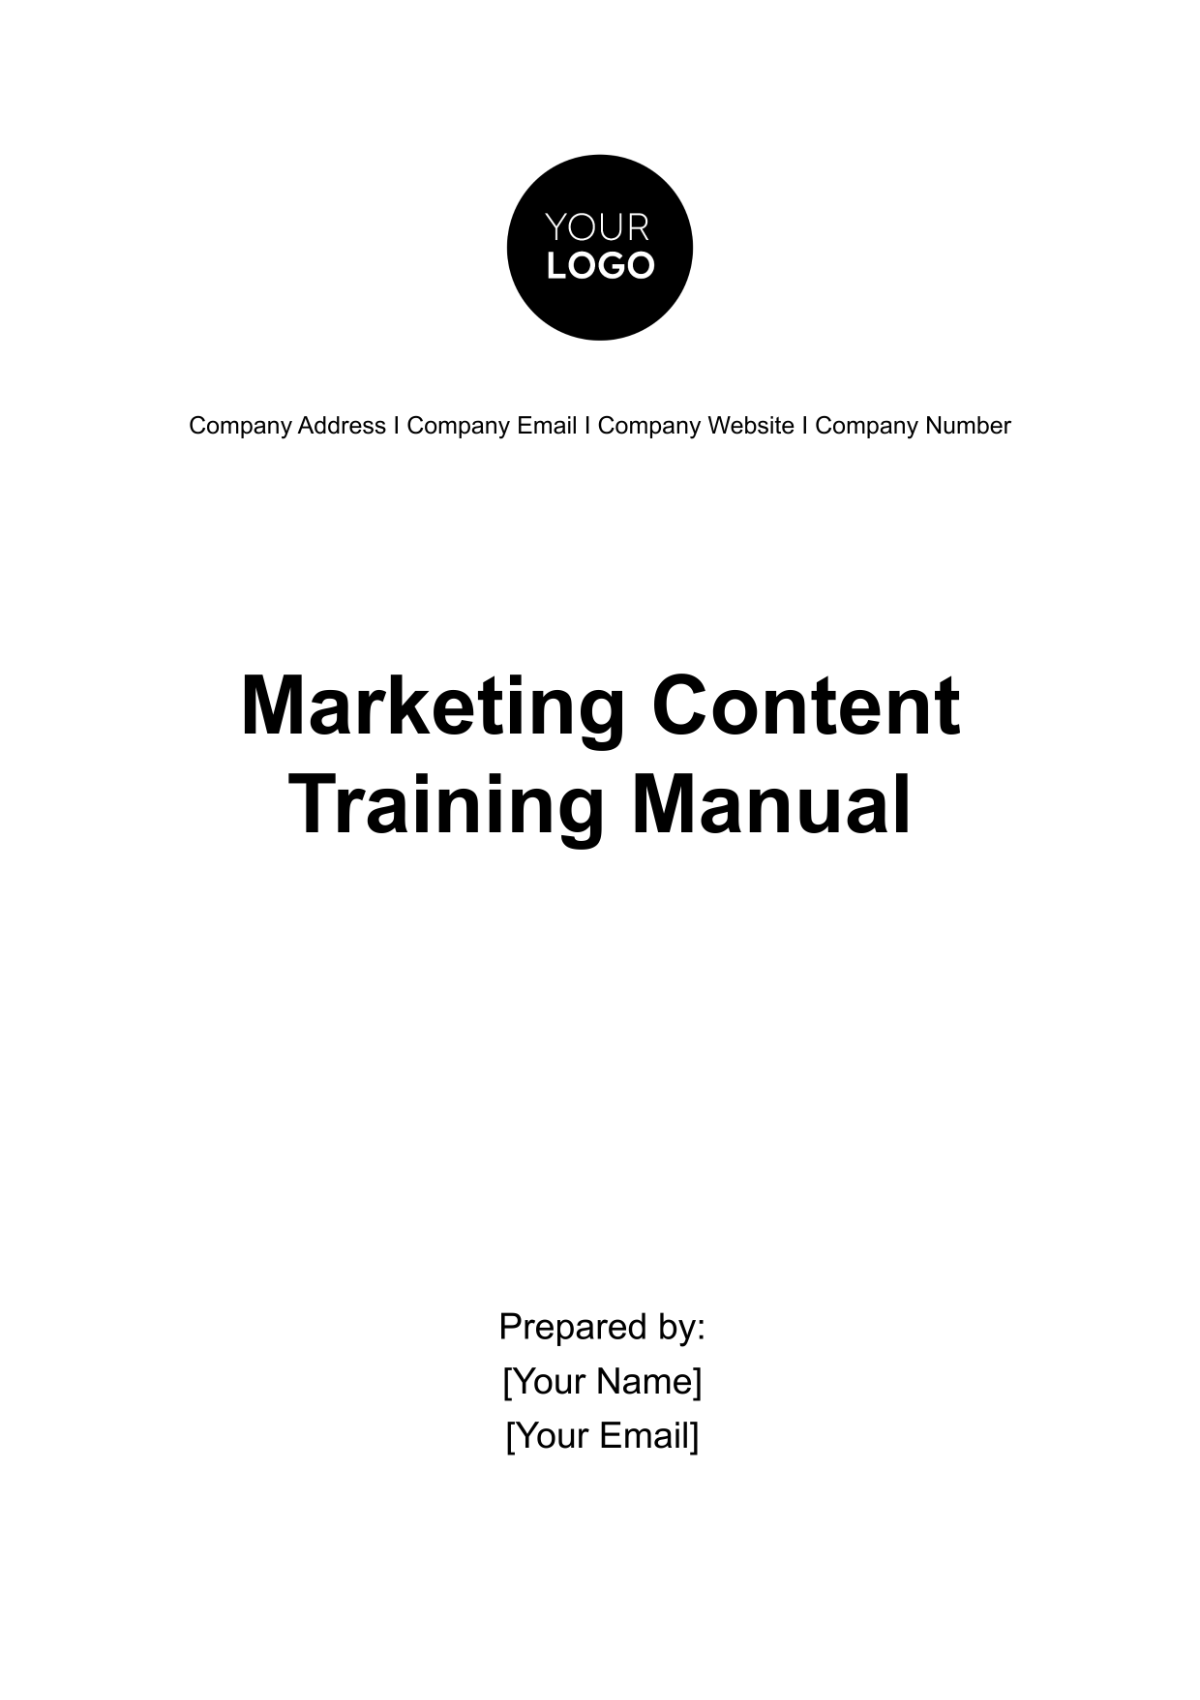 Marketing Content Training Manual Template